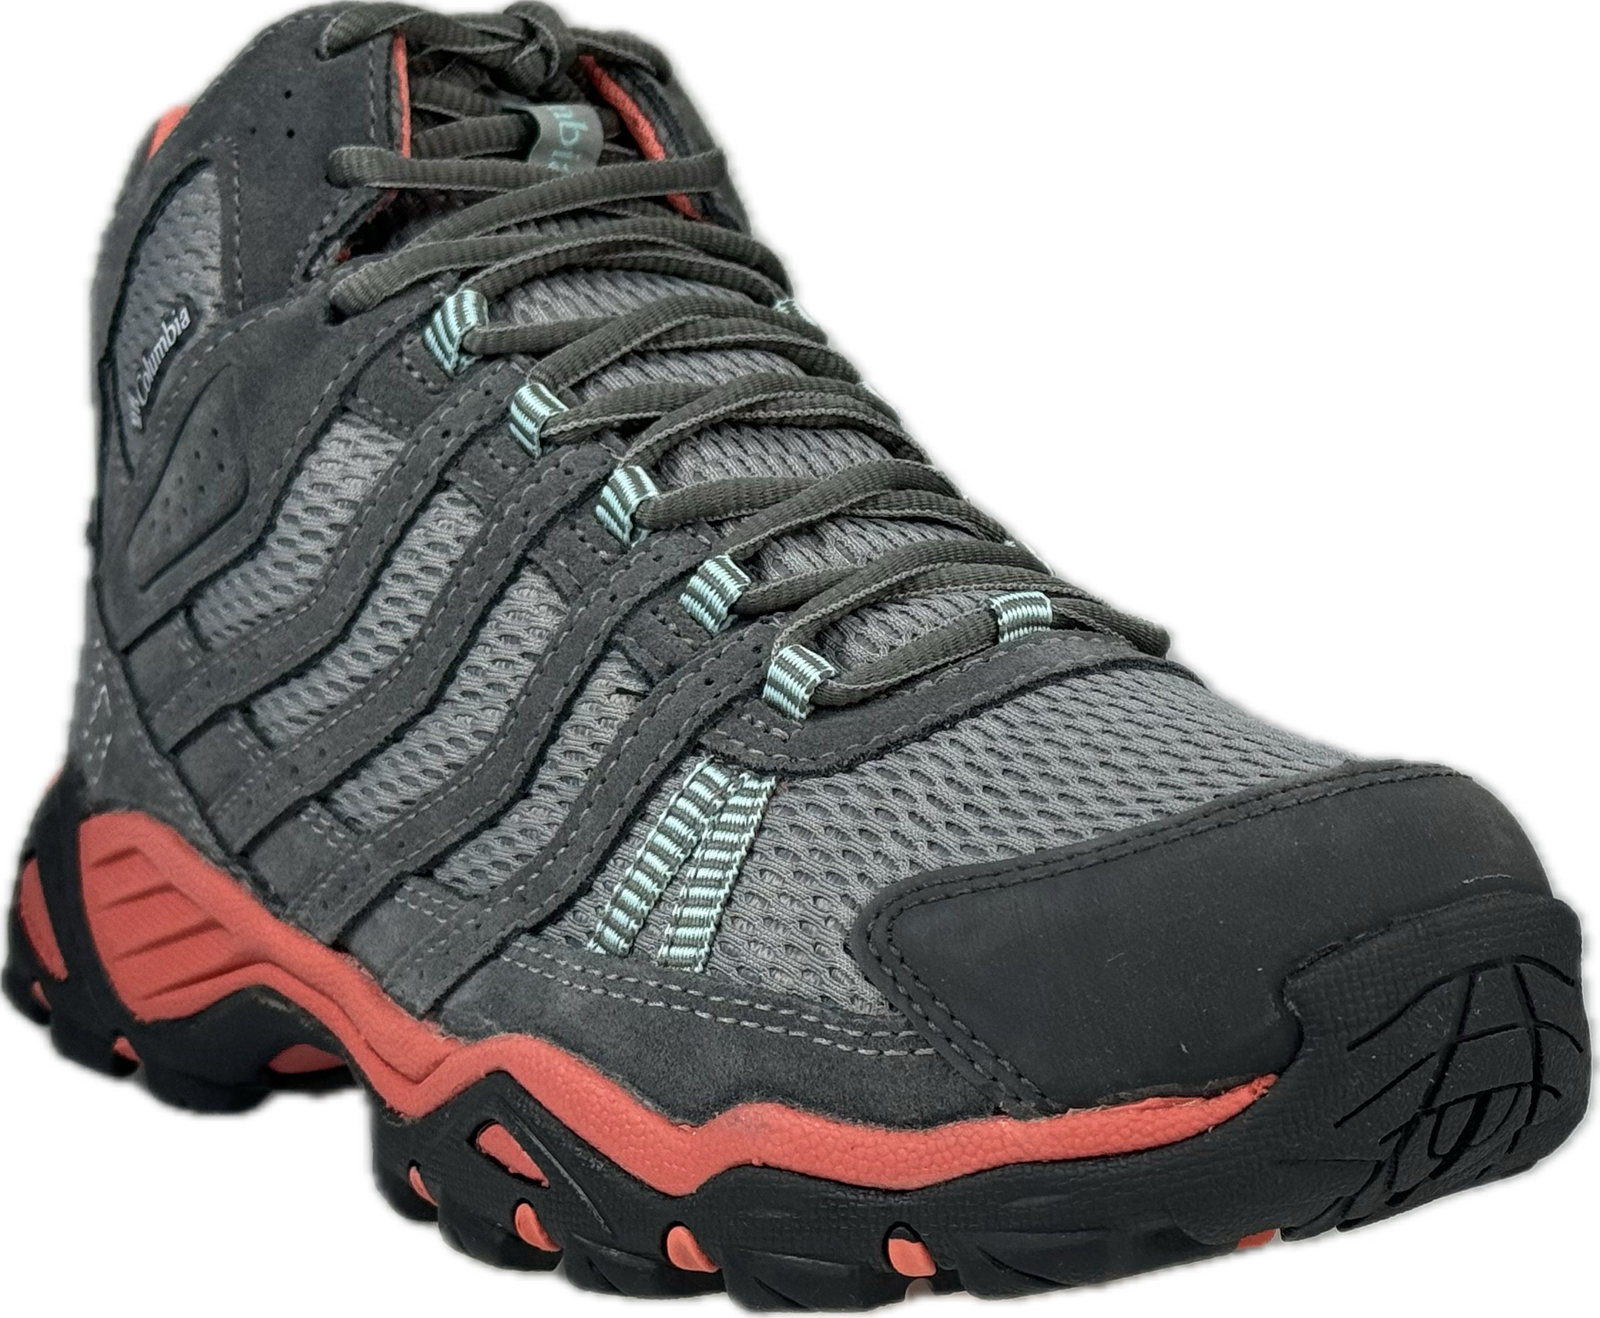 Primary image for Columbia Women's Armitage Lane Mid Gray Waterproof Hiking Boots, YL1098-036